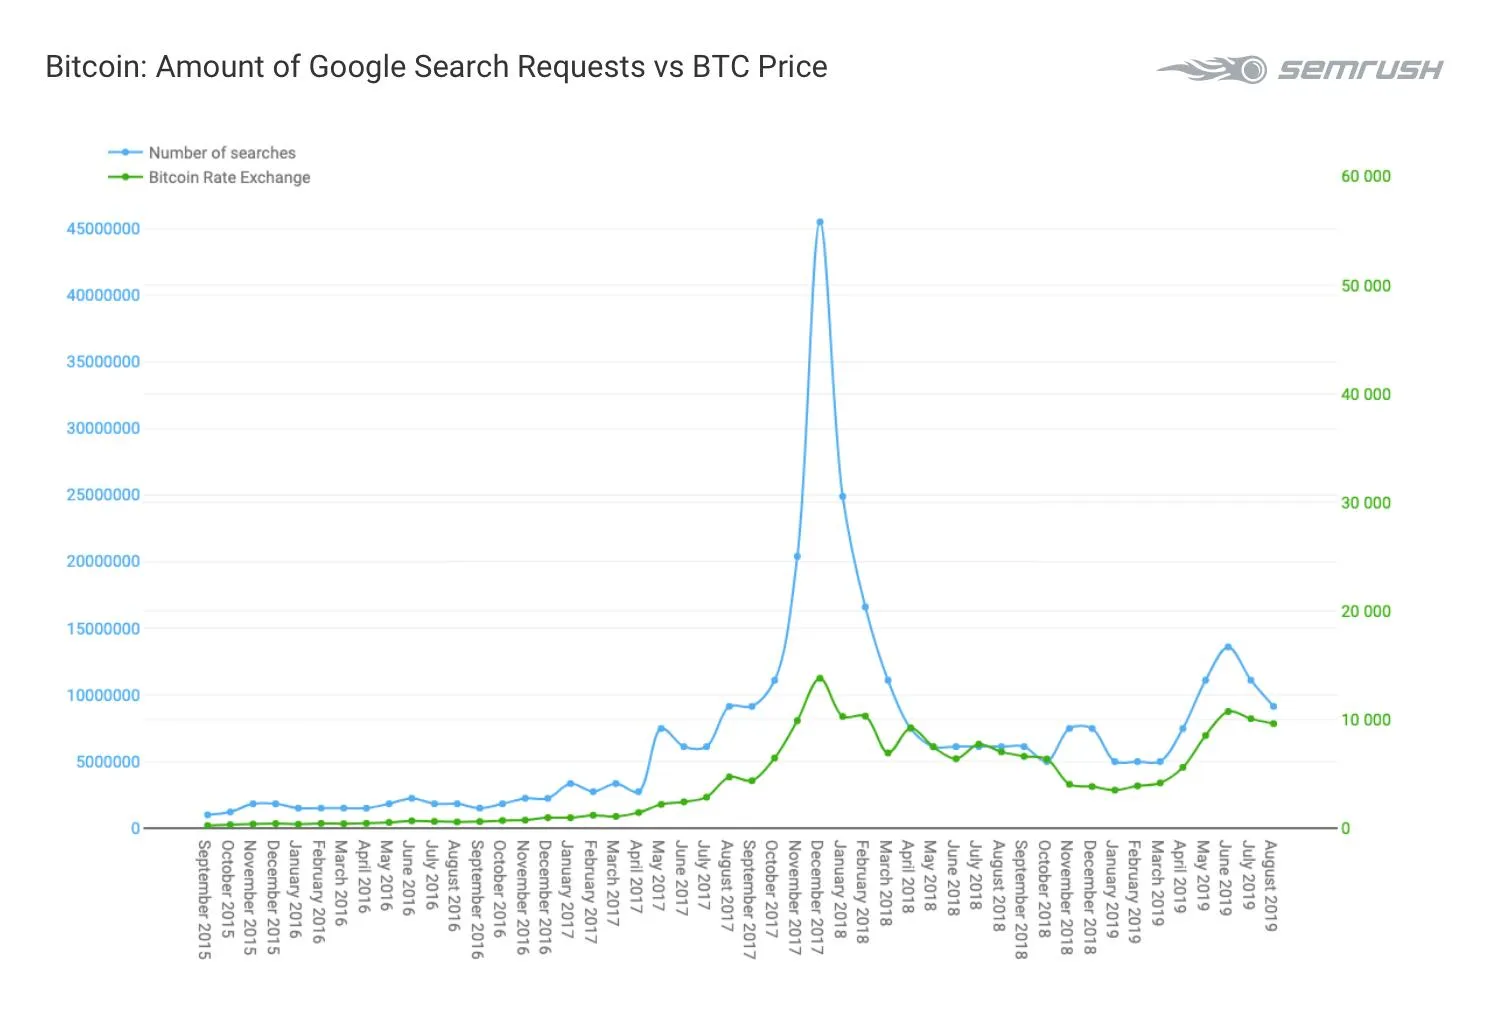 bitcoin price correlated with google searches